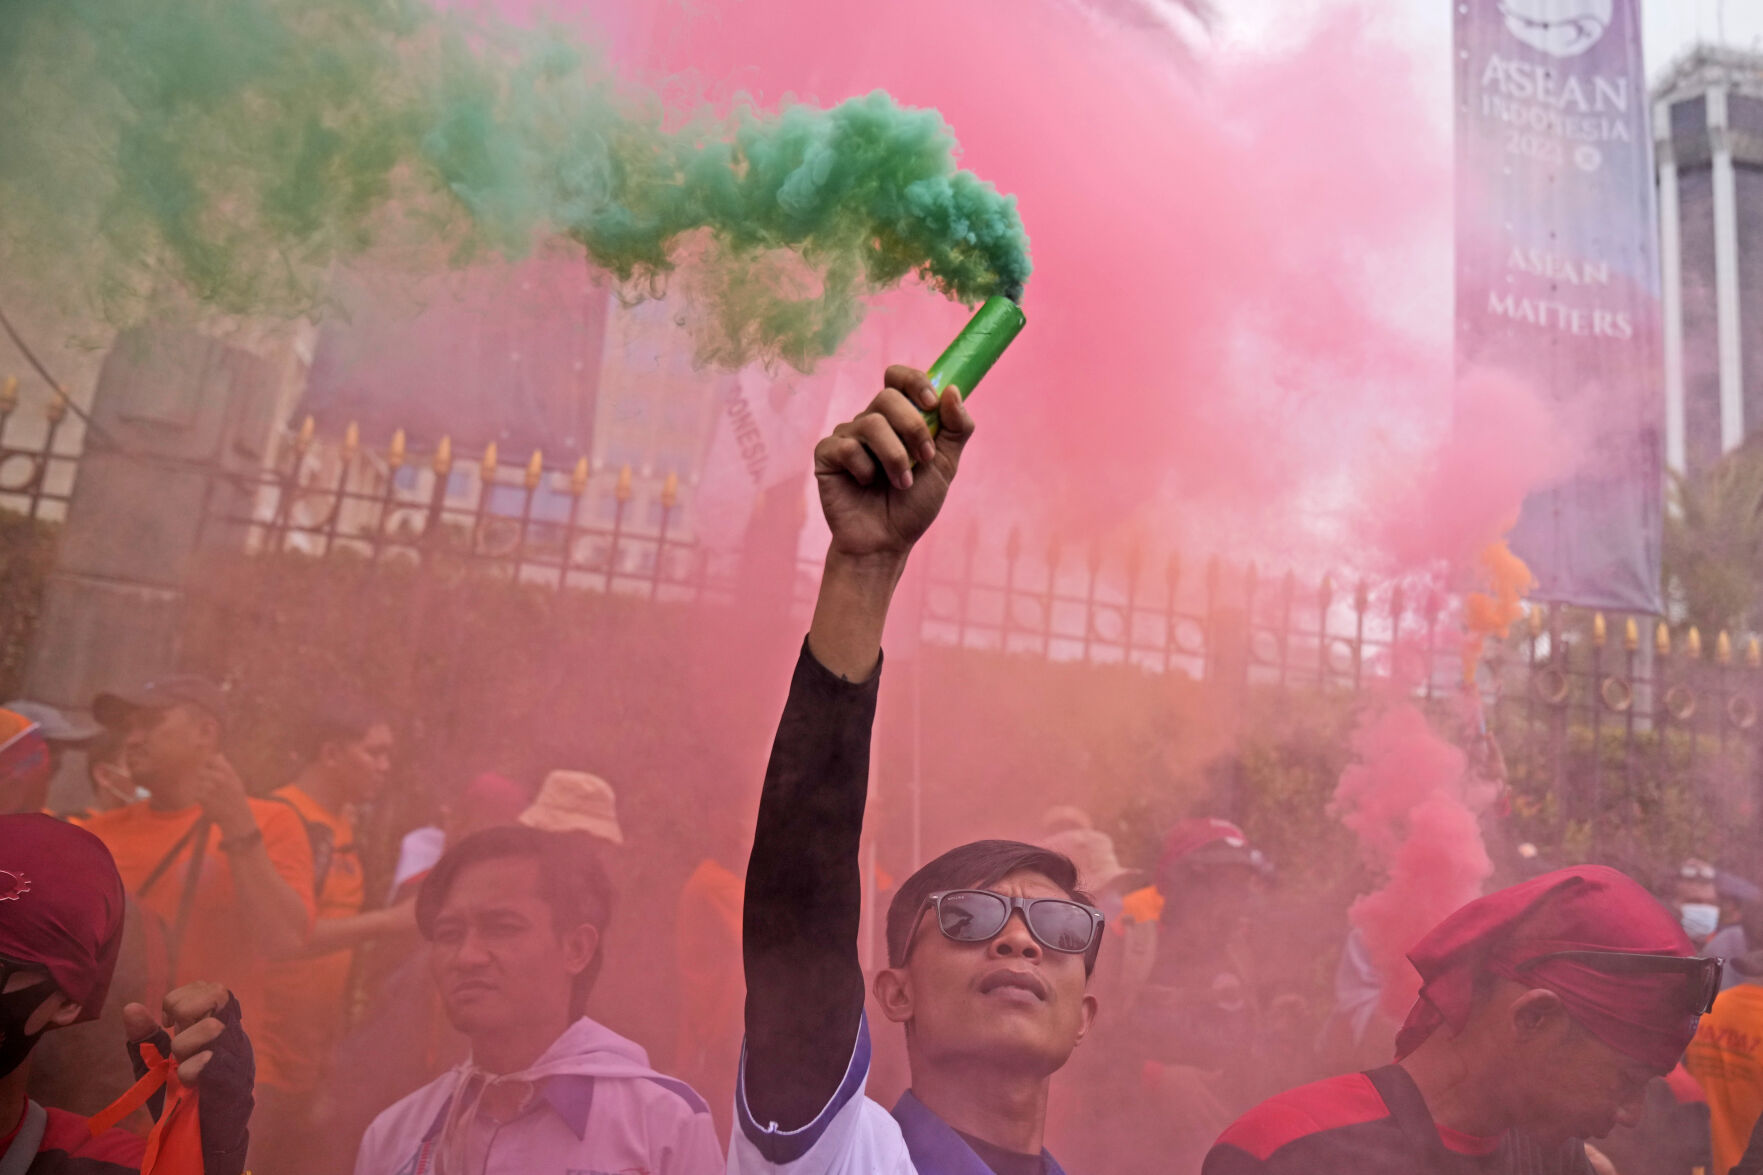 <p>A worker holds up a smoke stick during a May Day rally in Jakarta, Indonesia, Monday, May 1, 2023. Workers and activists across Asia are marking May Day with protests calling for higher salaries and better working conditions, among other demands. (AP Photo/Dita Alangkara)</p>   PHOTO CREDIT: Dita Alangkara 